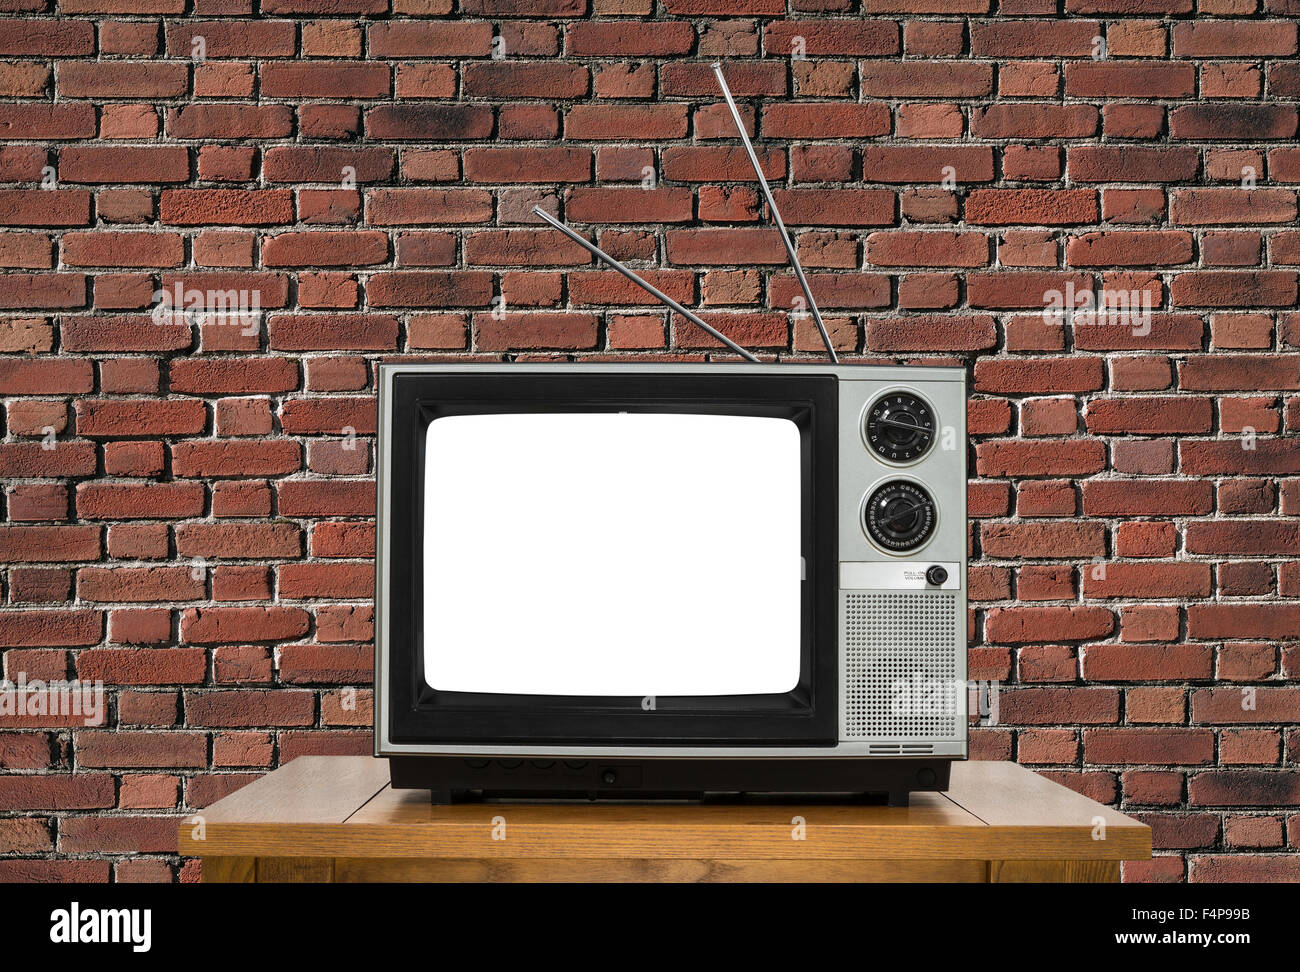 Old analogue television with cut out screen and brick wall. Stock Photo